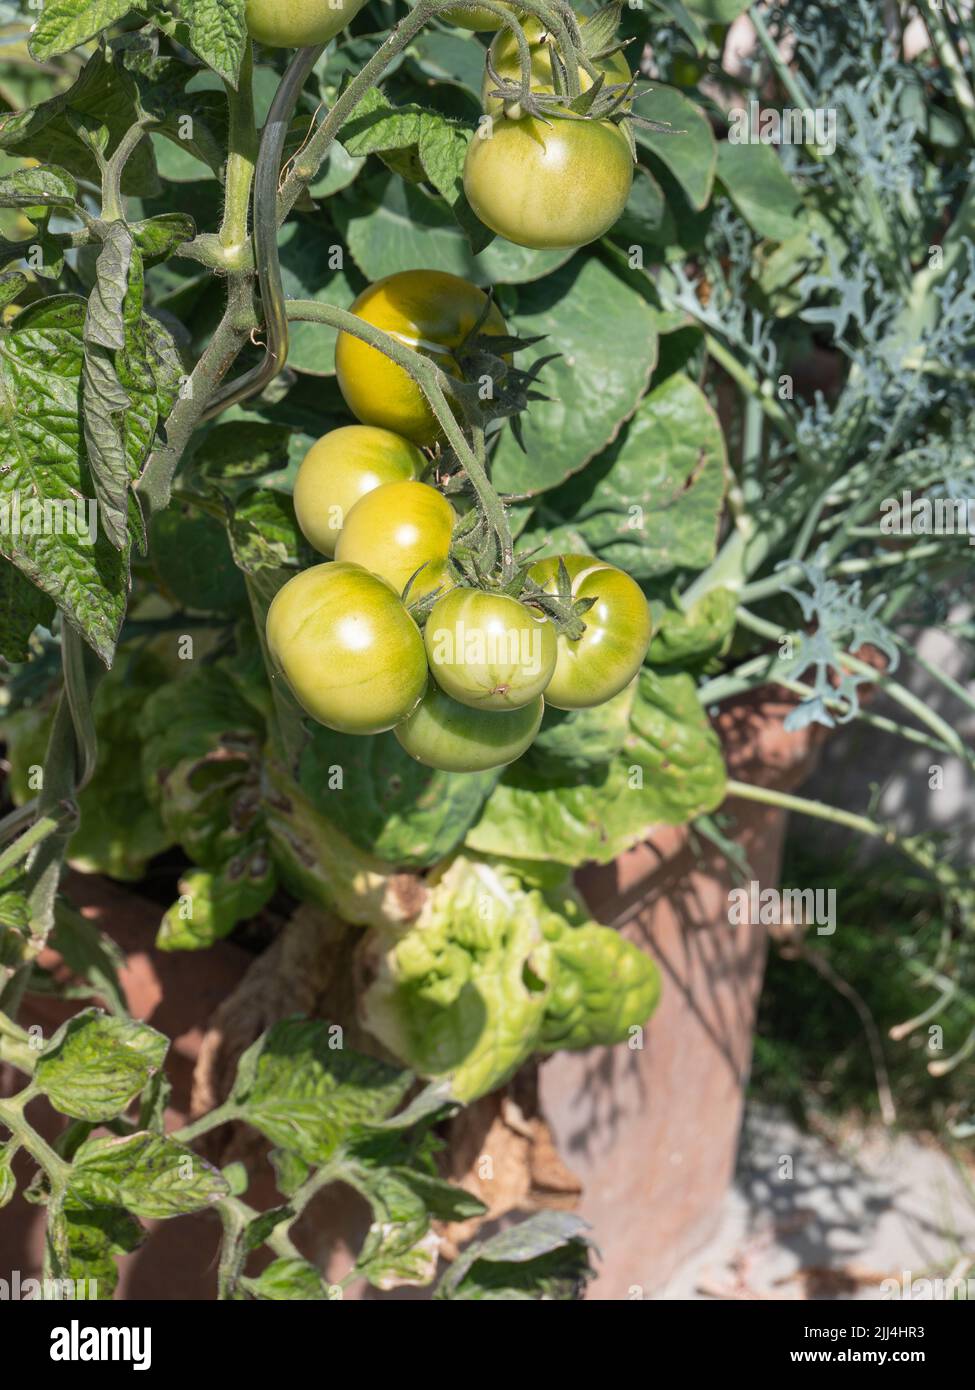 A bunch of still unripe green tomatoes Stock Photo